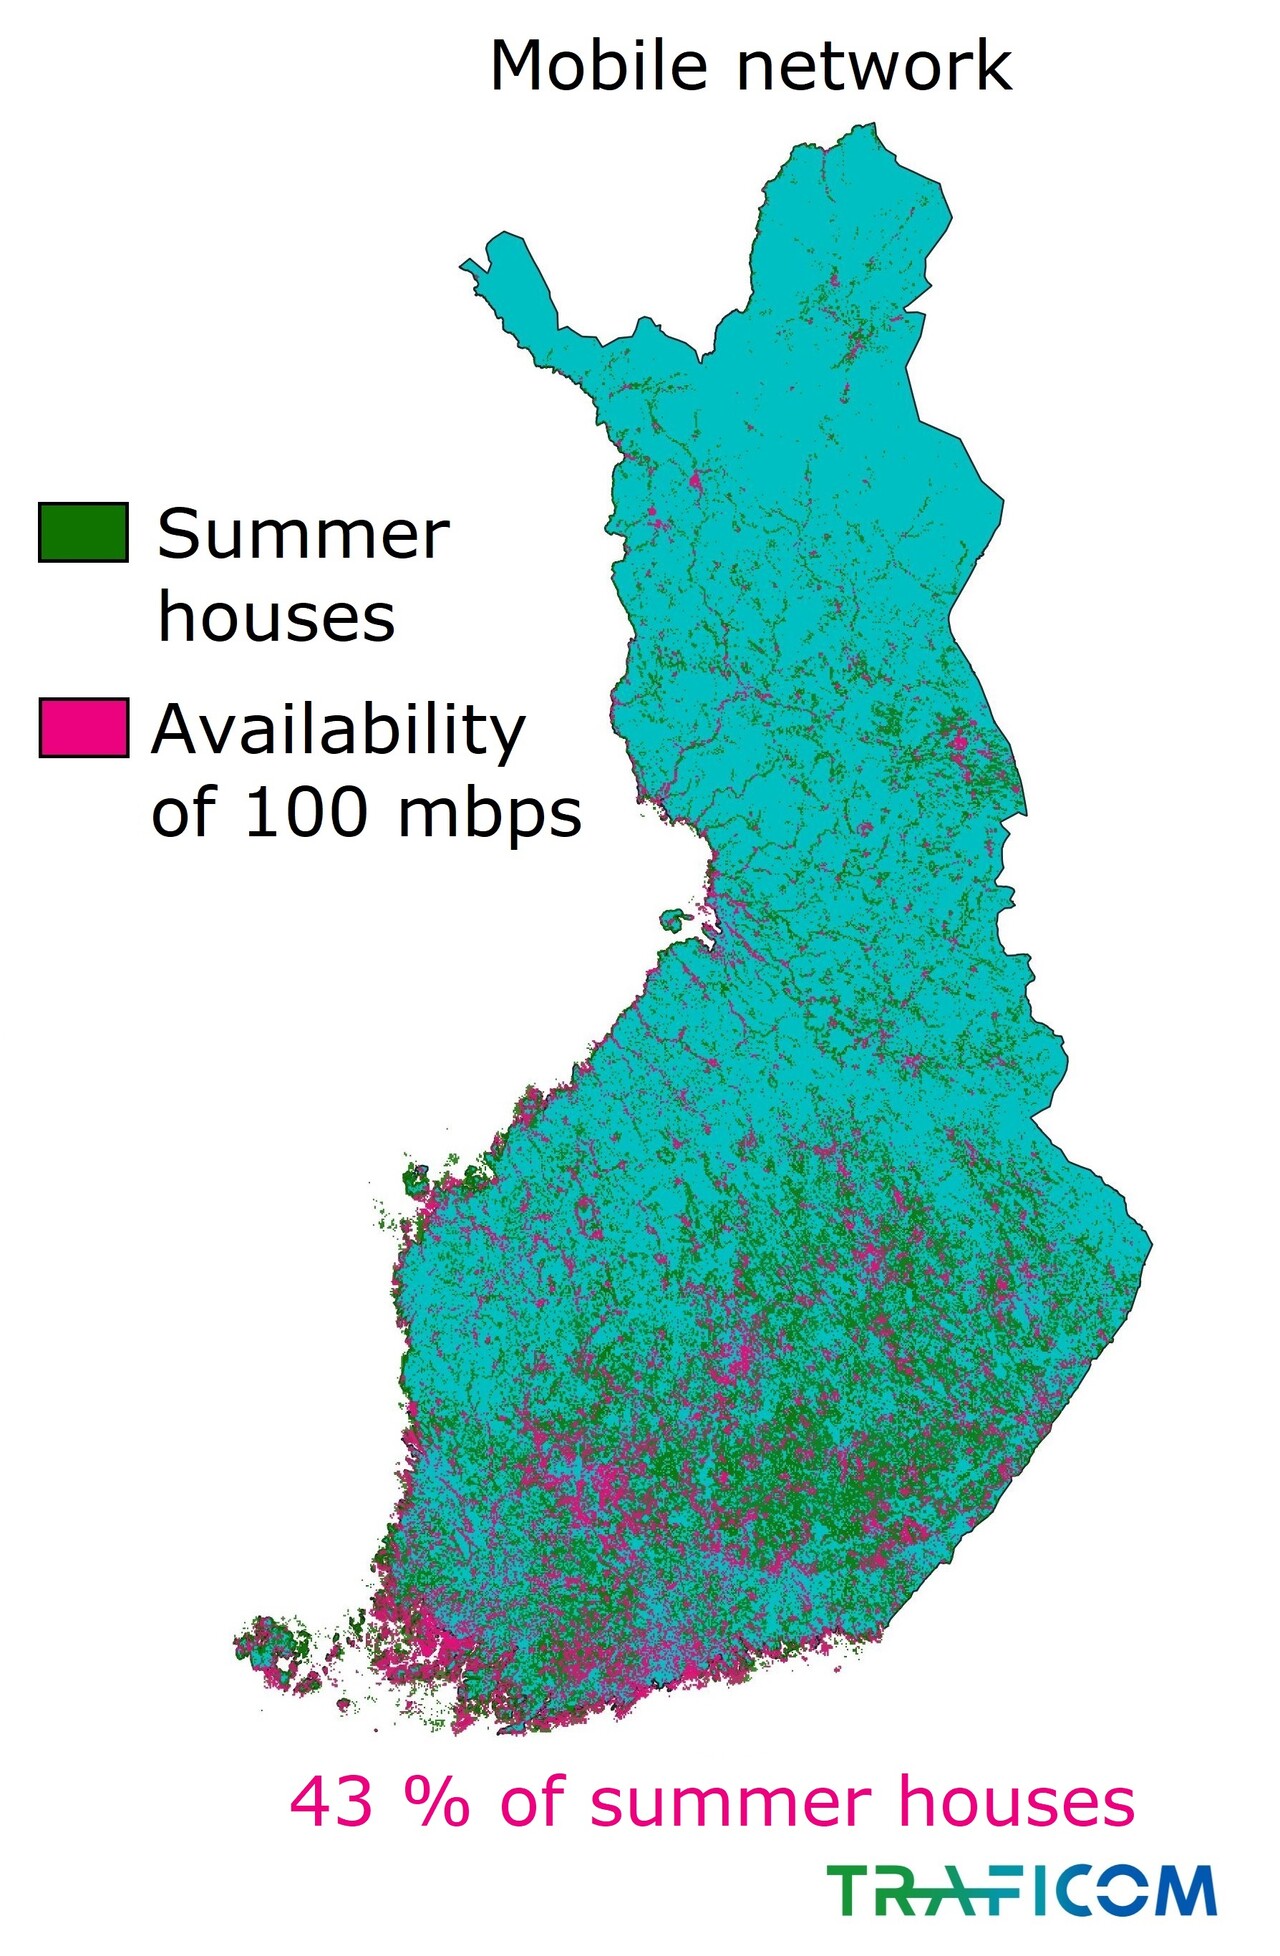 The map shows the availability of 100 Mbit/s mobile broadband in Finnish summer houses at the end of 2020: 43% of summer houses.